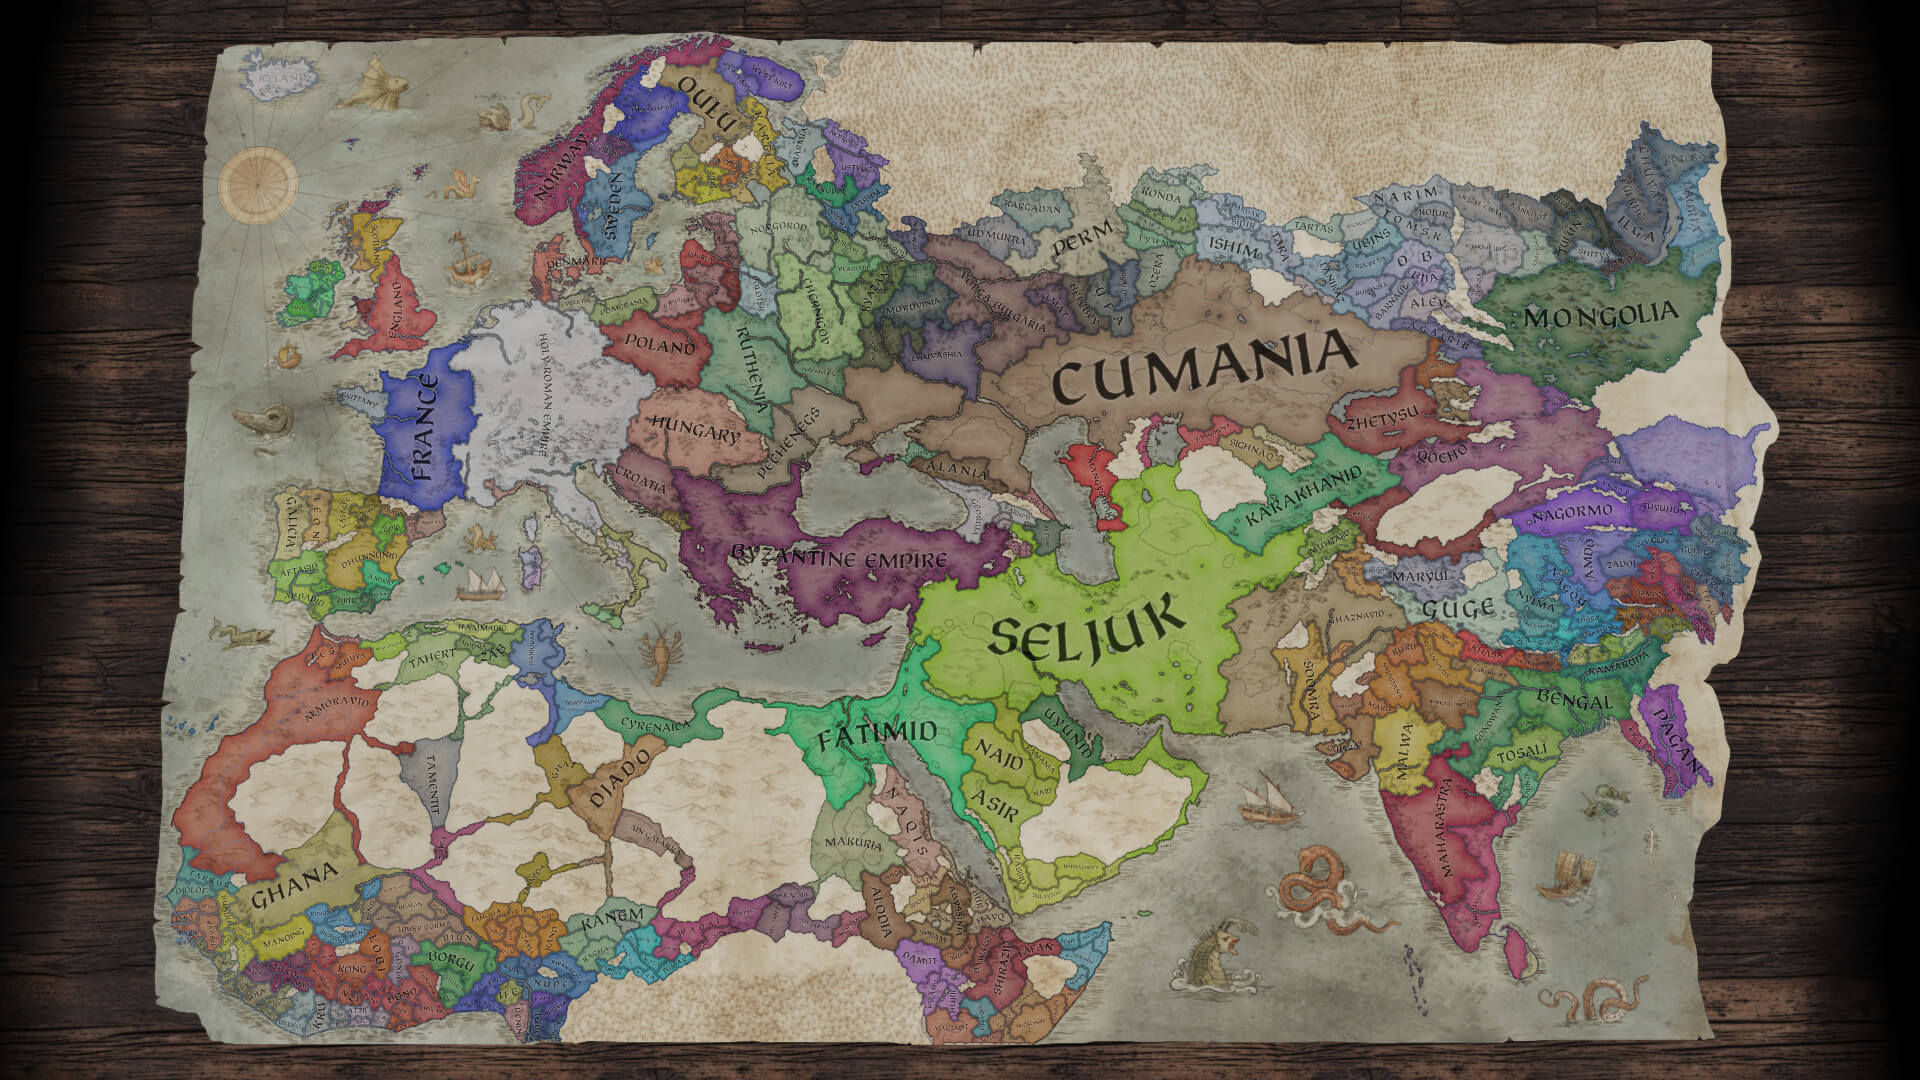 Crusader Kings 3 Map - What Does It Feature? | GameWatcher